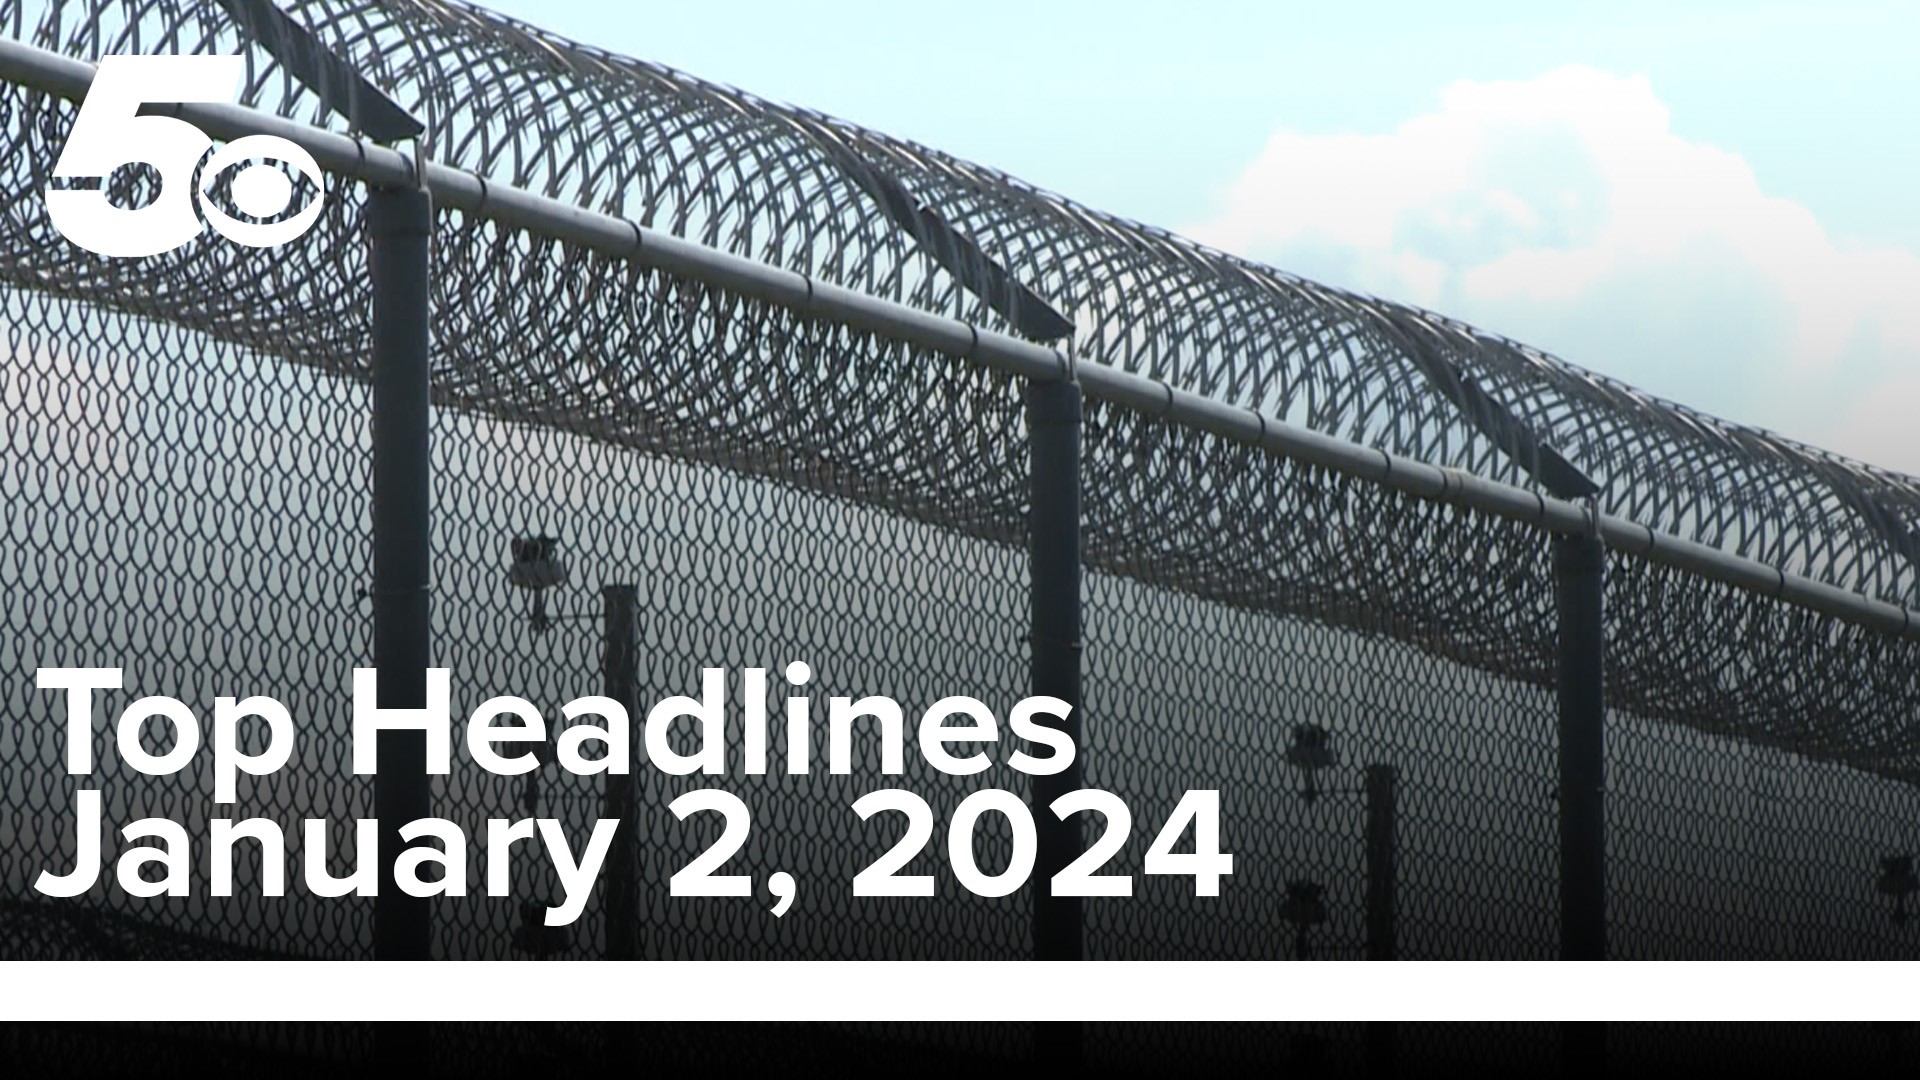 Don't miss your 5NEWS Top Headlines for January 2, 2024.